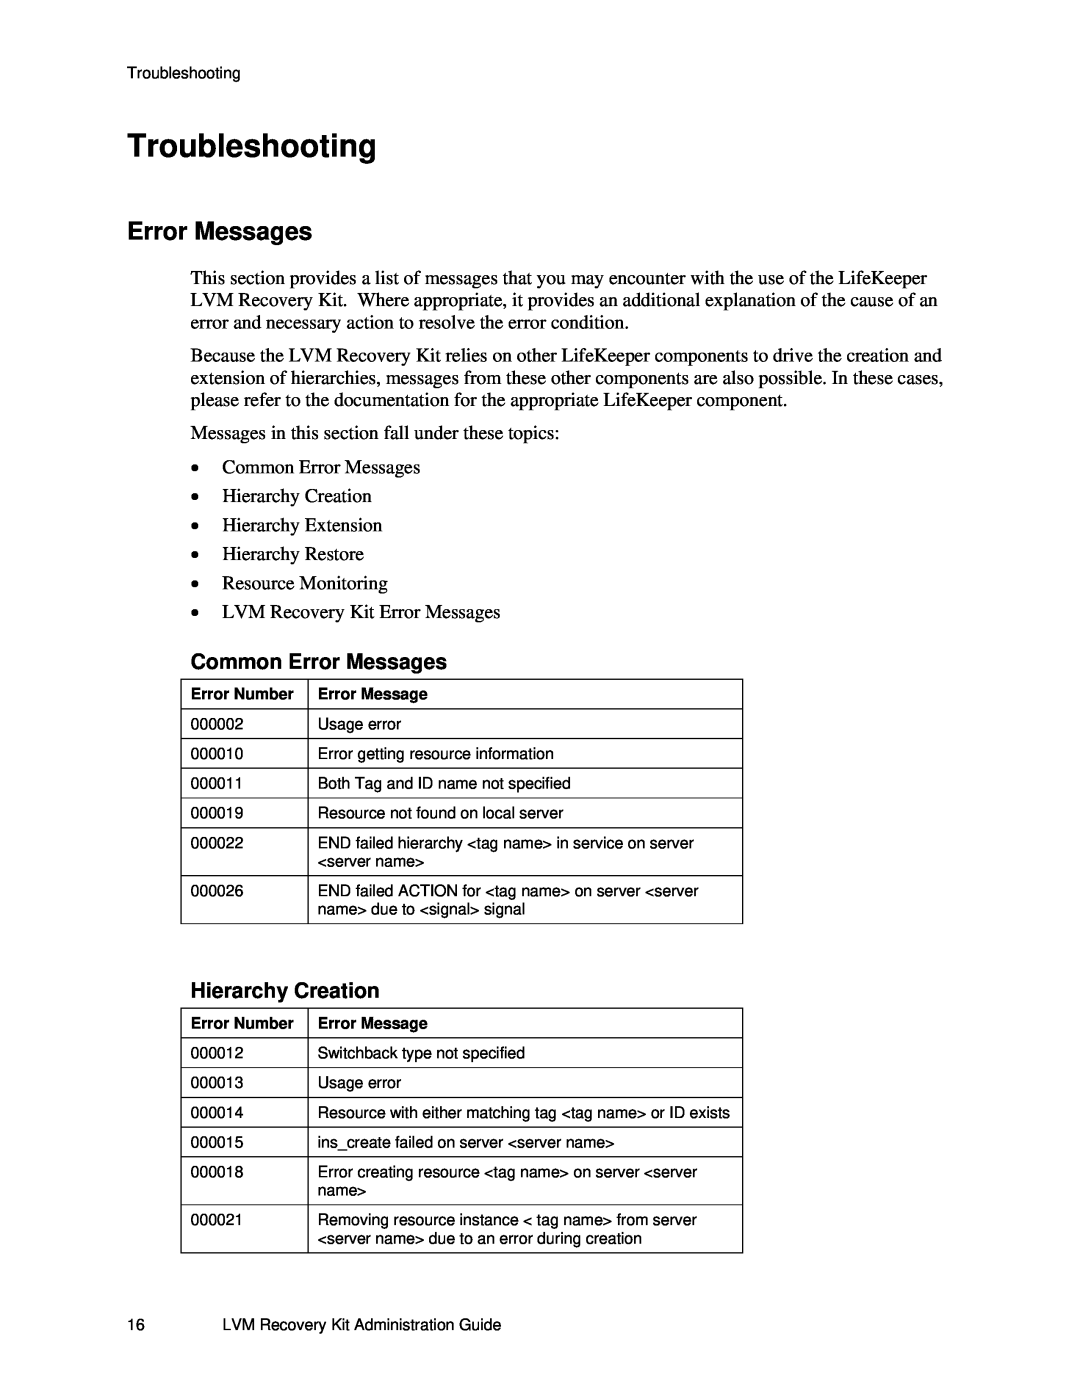 SteelEye 4.5.0 manual Troubleshooting, Common Error Messages, Hierarchy Creation 